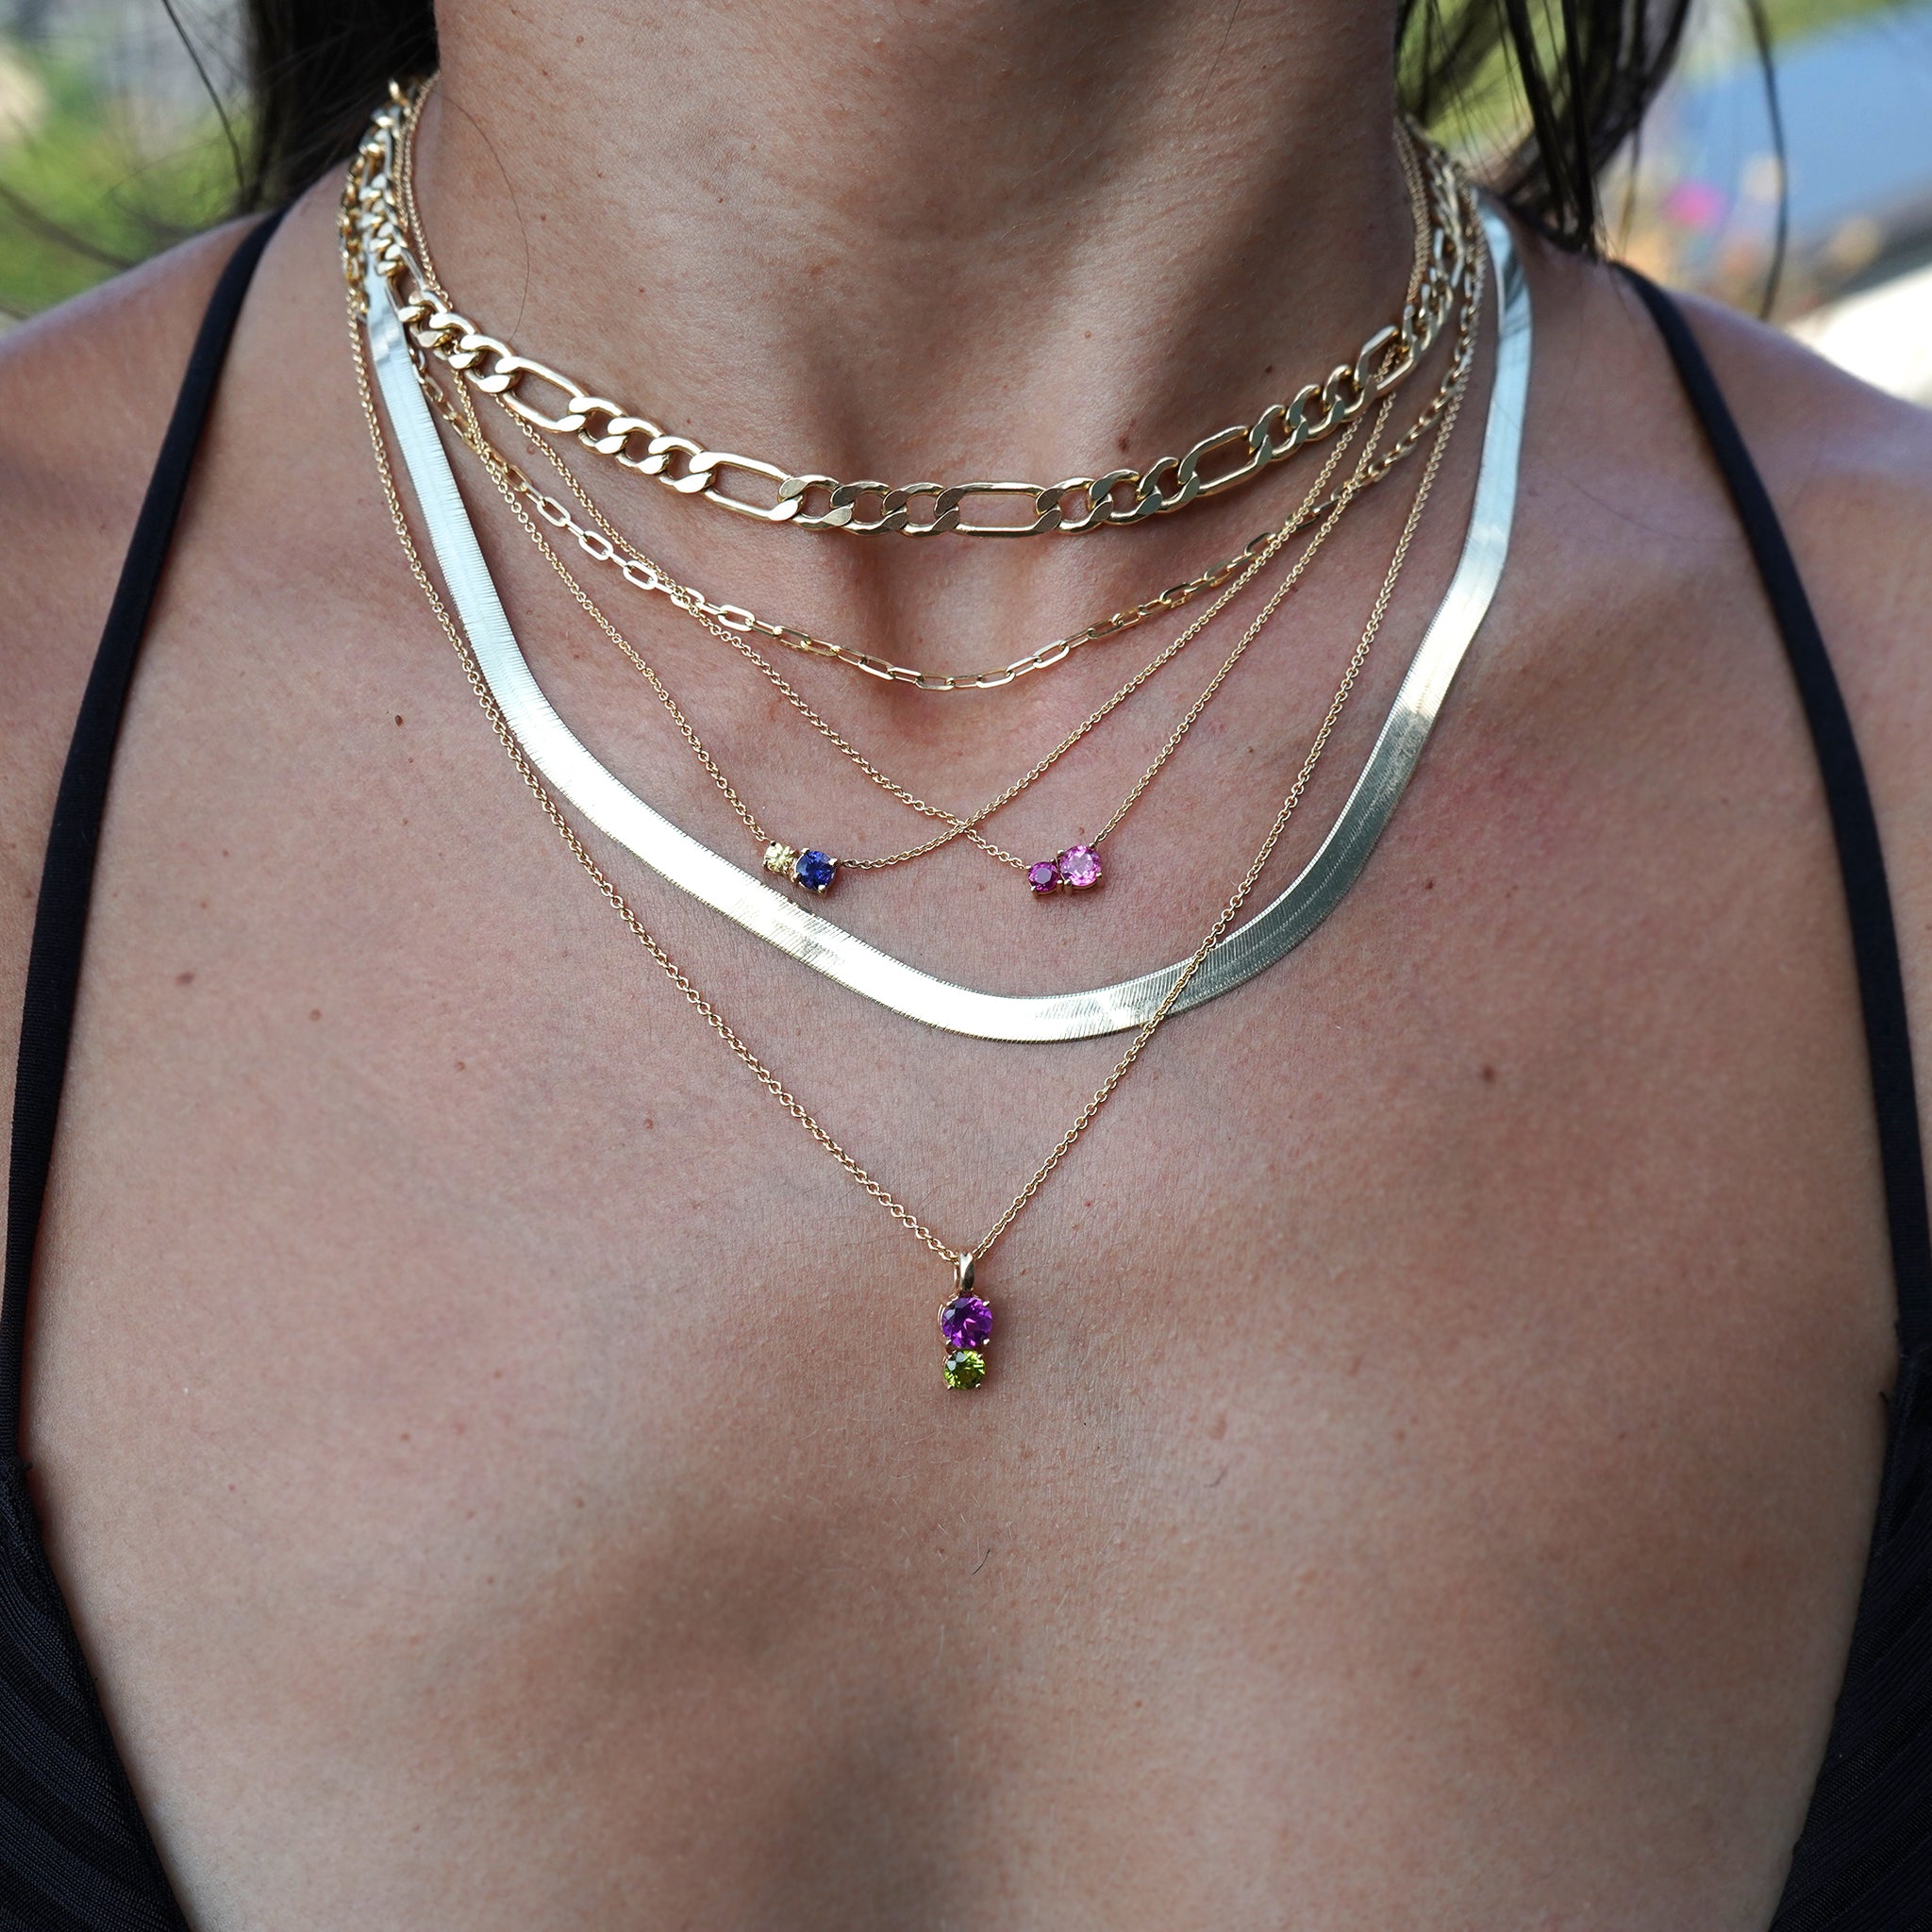 Woman's neck adorned with Lico Jewelry's 2 stone necklace in solid 14k yellow gold featuring genuine pink tourmaline and rubelite on a 16-inch rolo chain, made in Montreal.